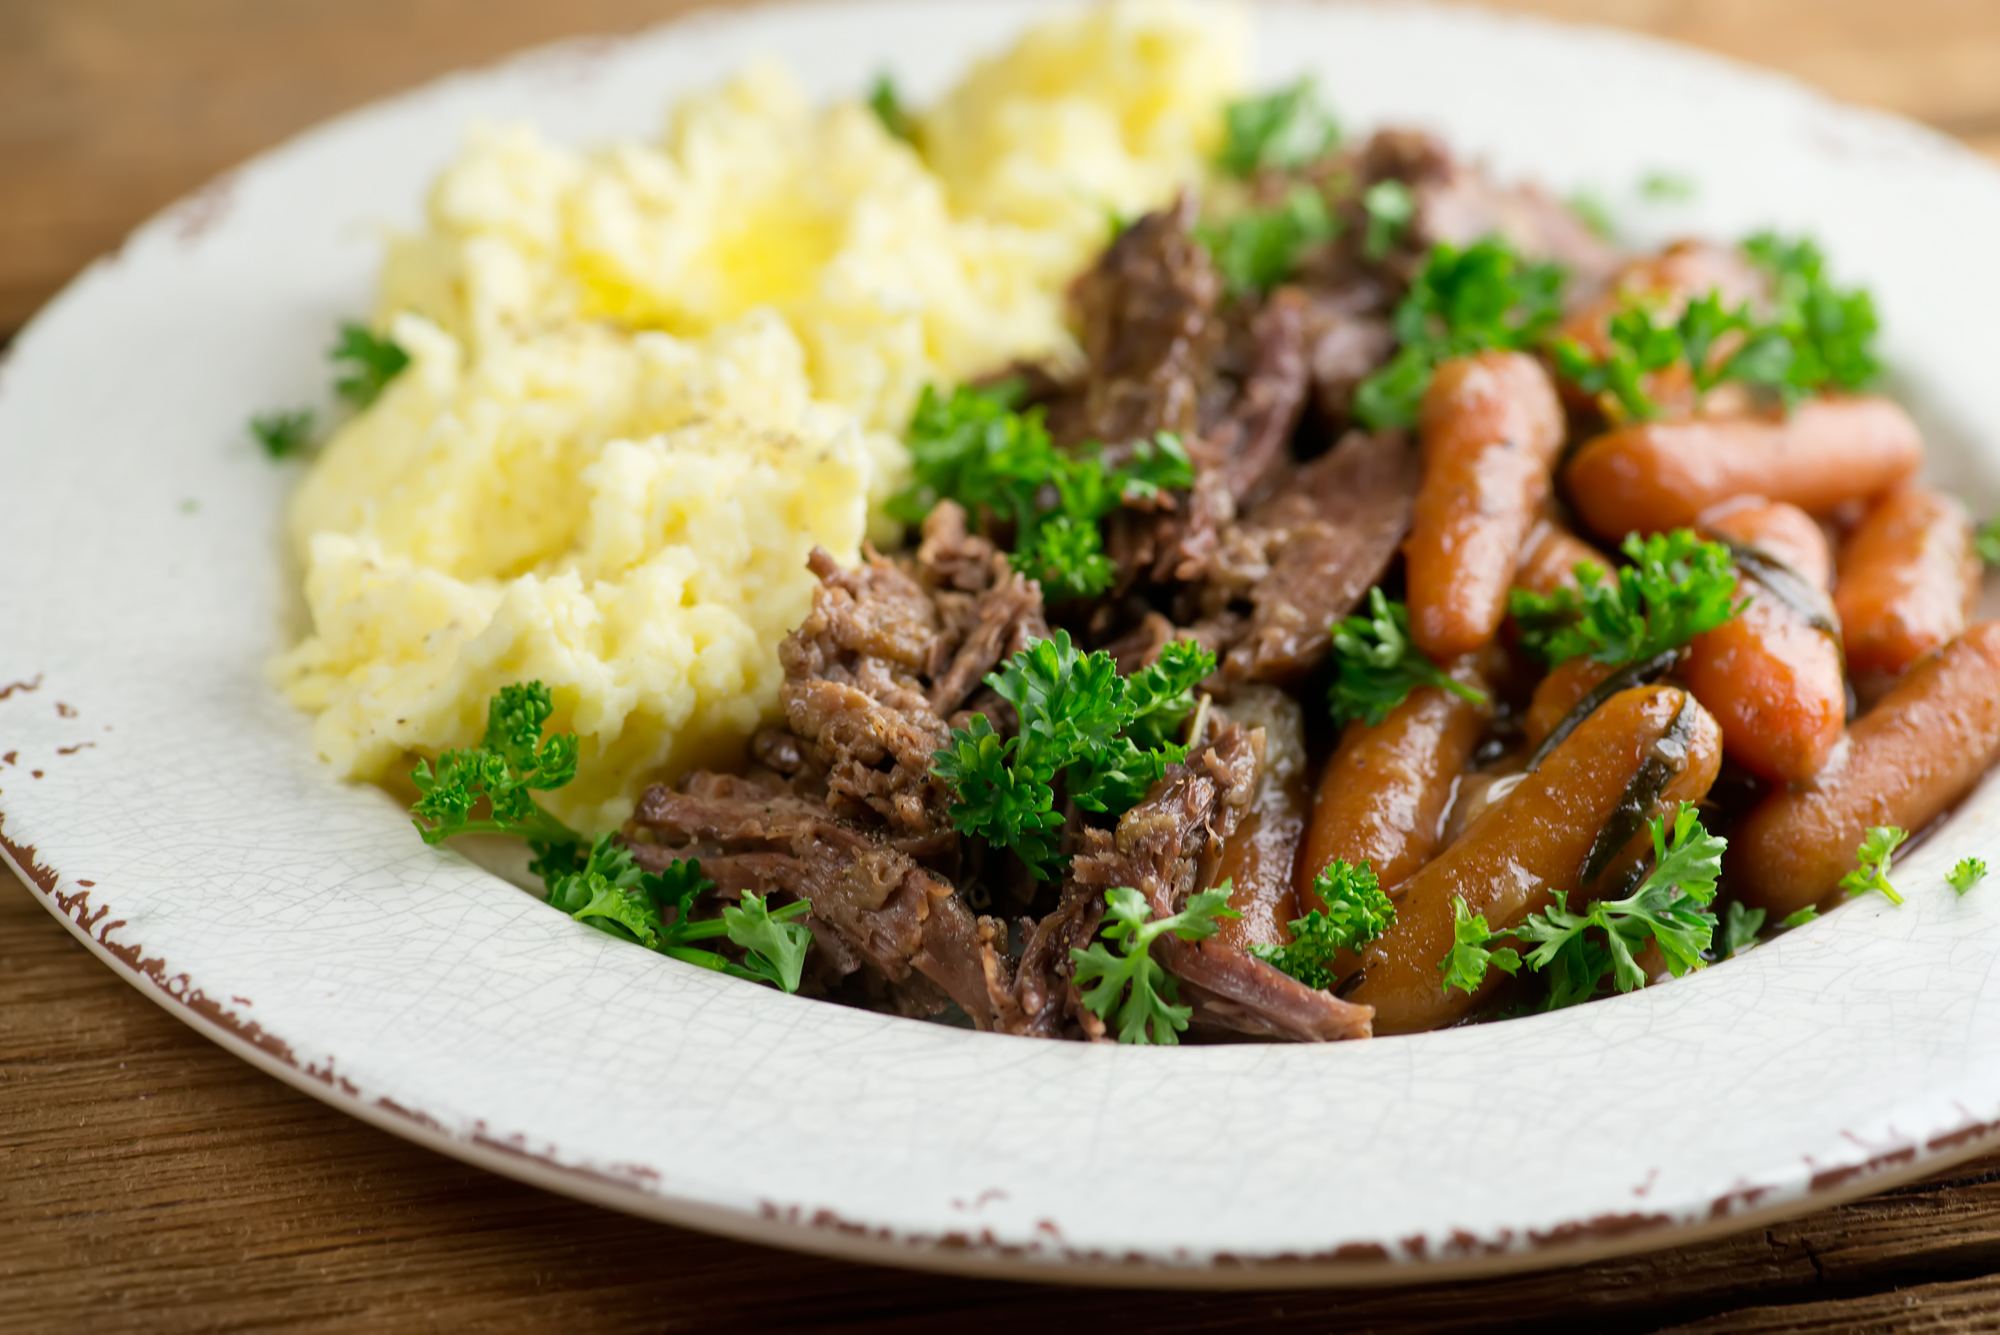 Shredded pot roast on a plate with mashed potatoes.